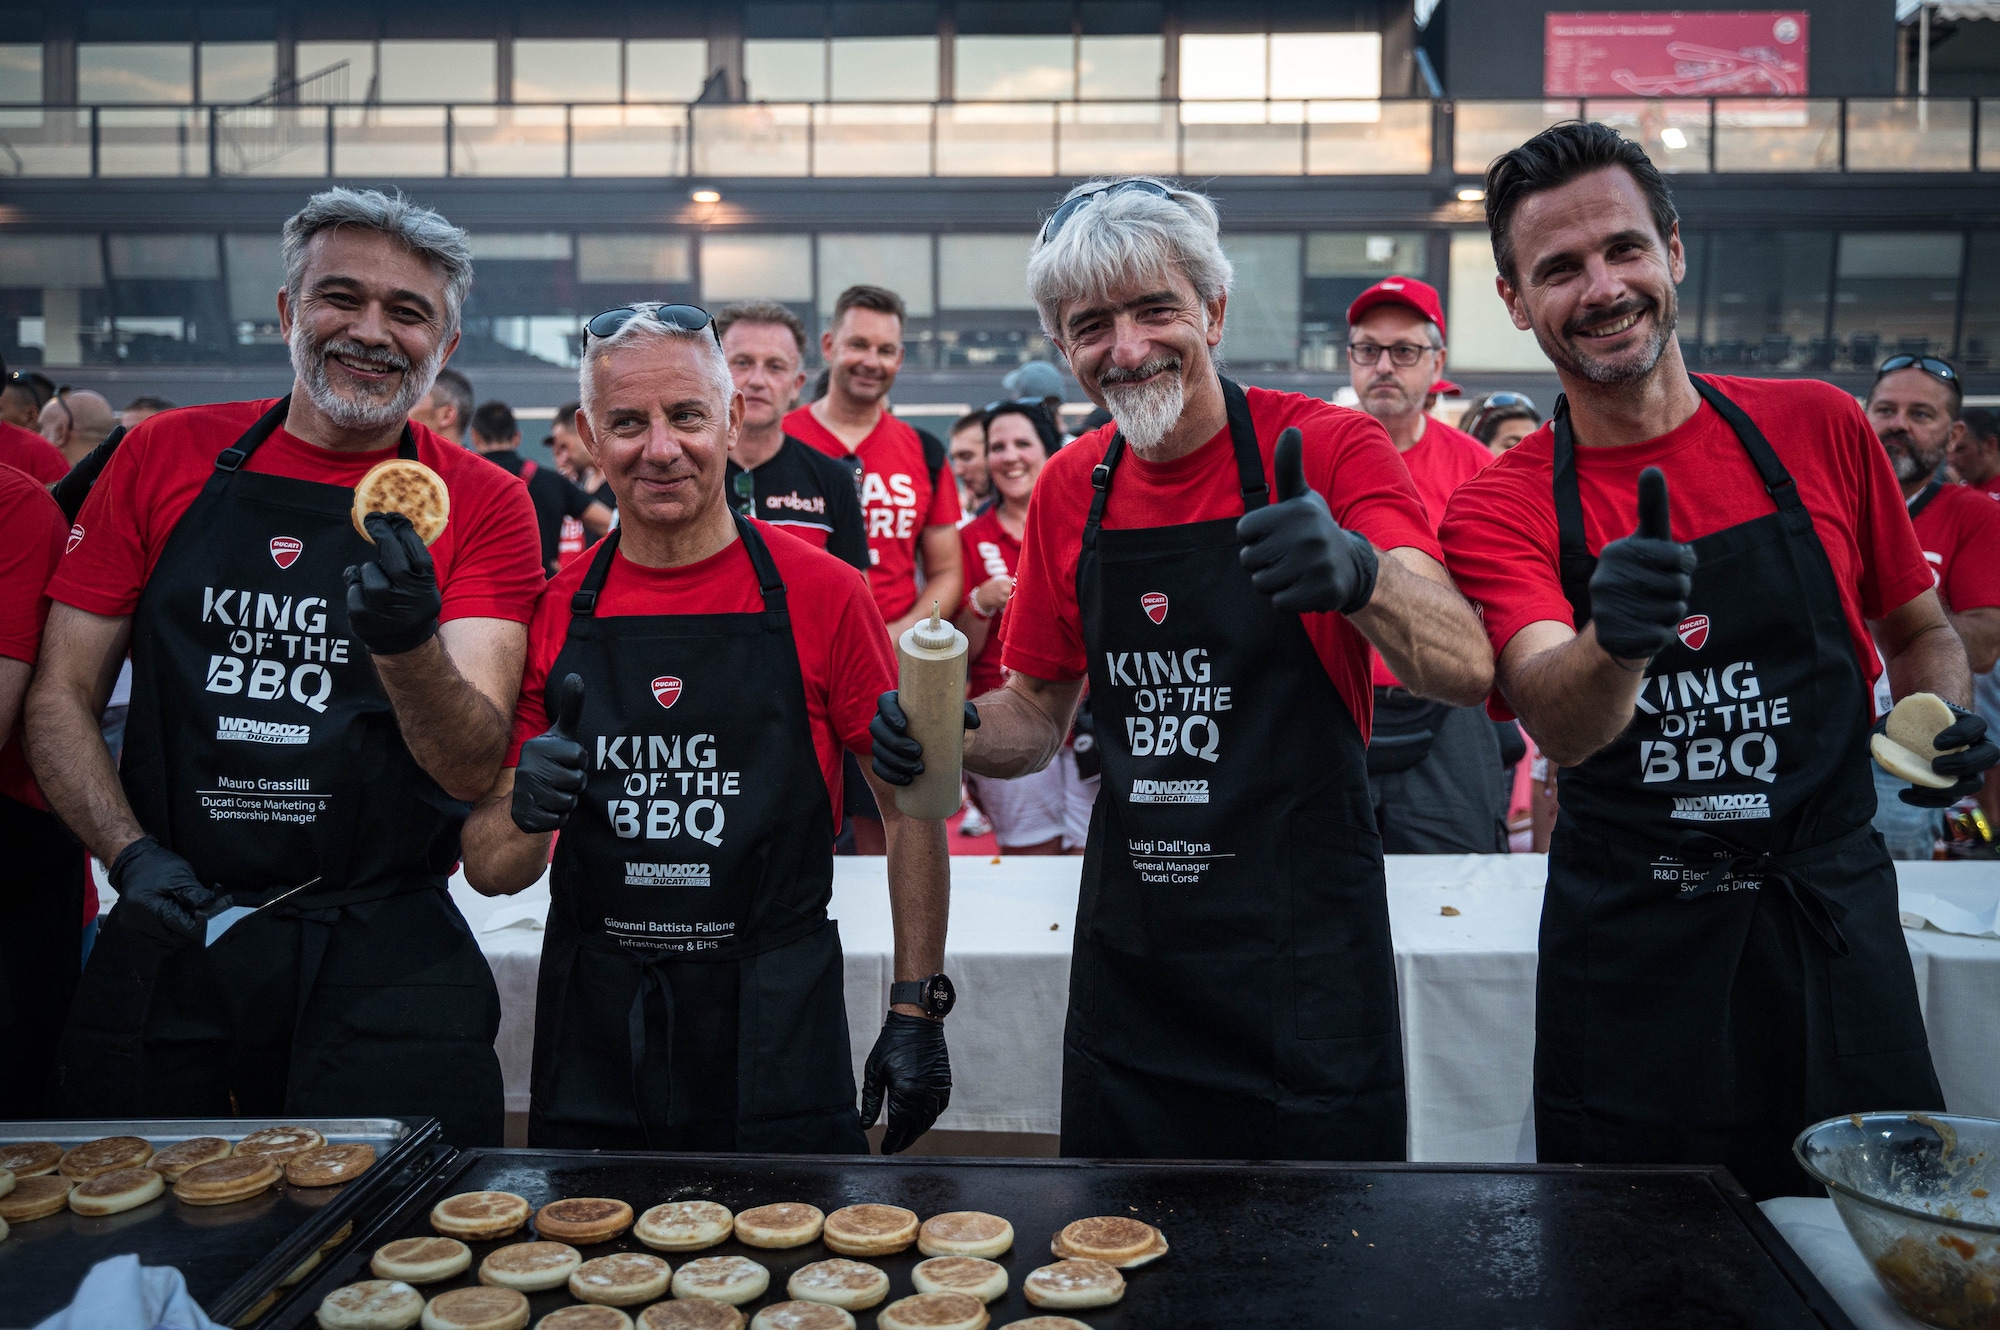 Members of Ducati keeping the barbecue lit and feeding the masses present at 2022's iteration of the World Ducati Week.